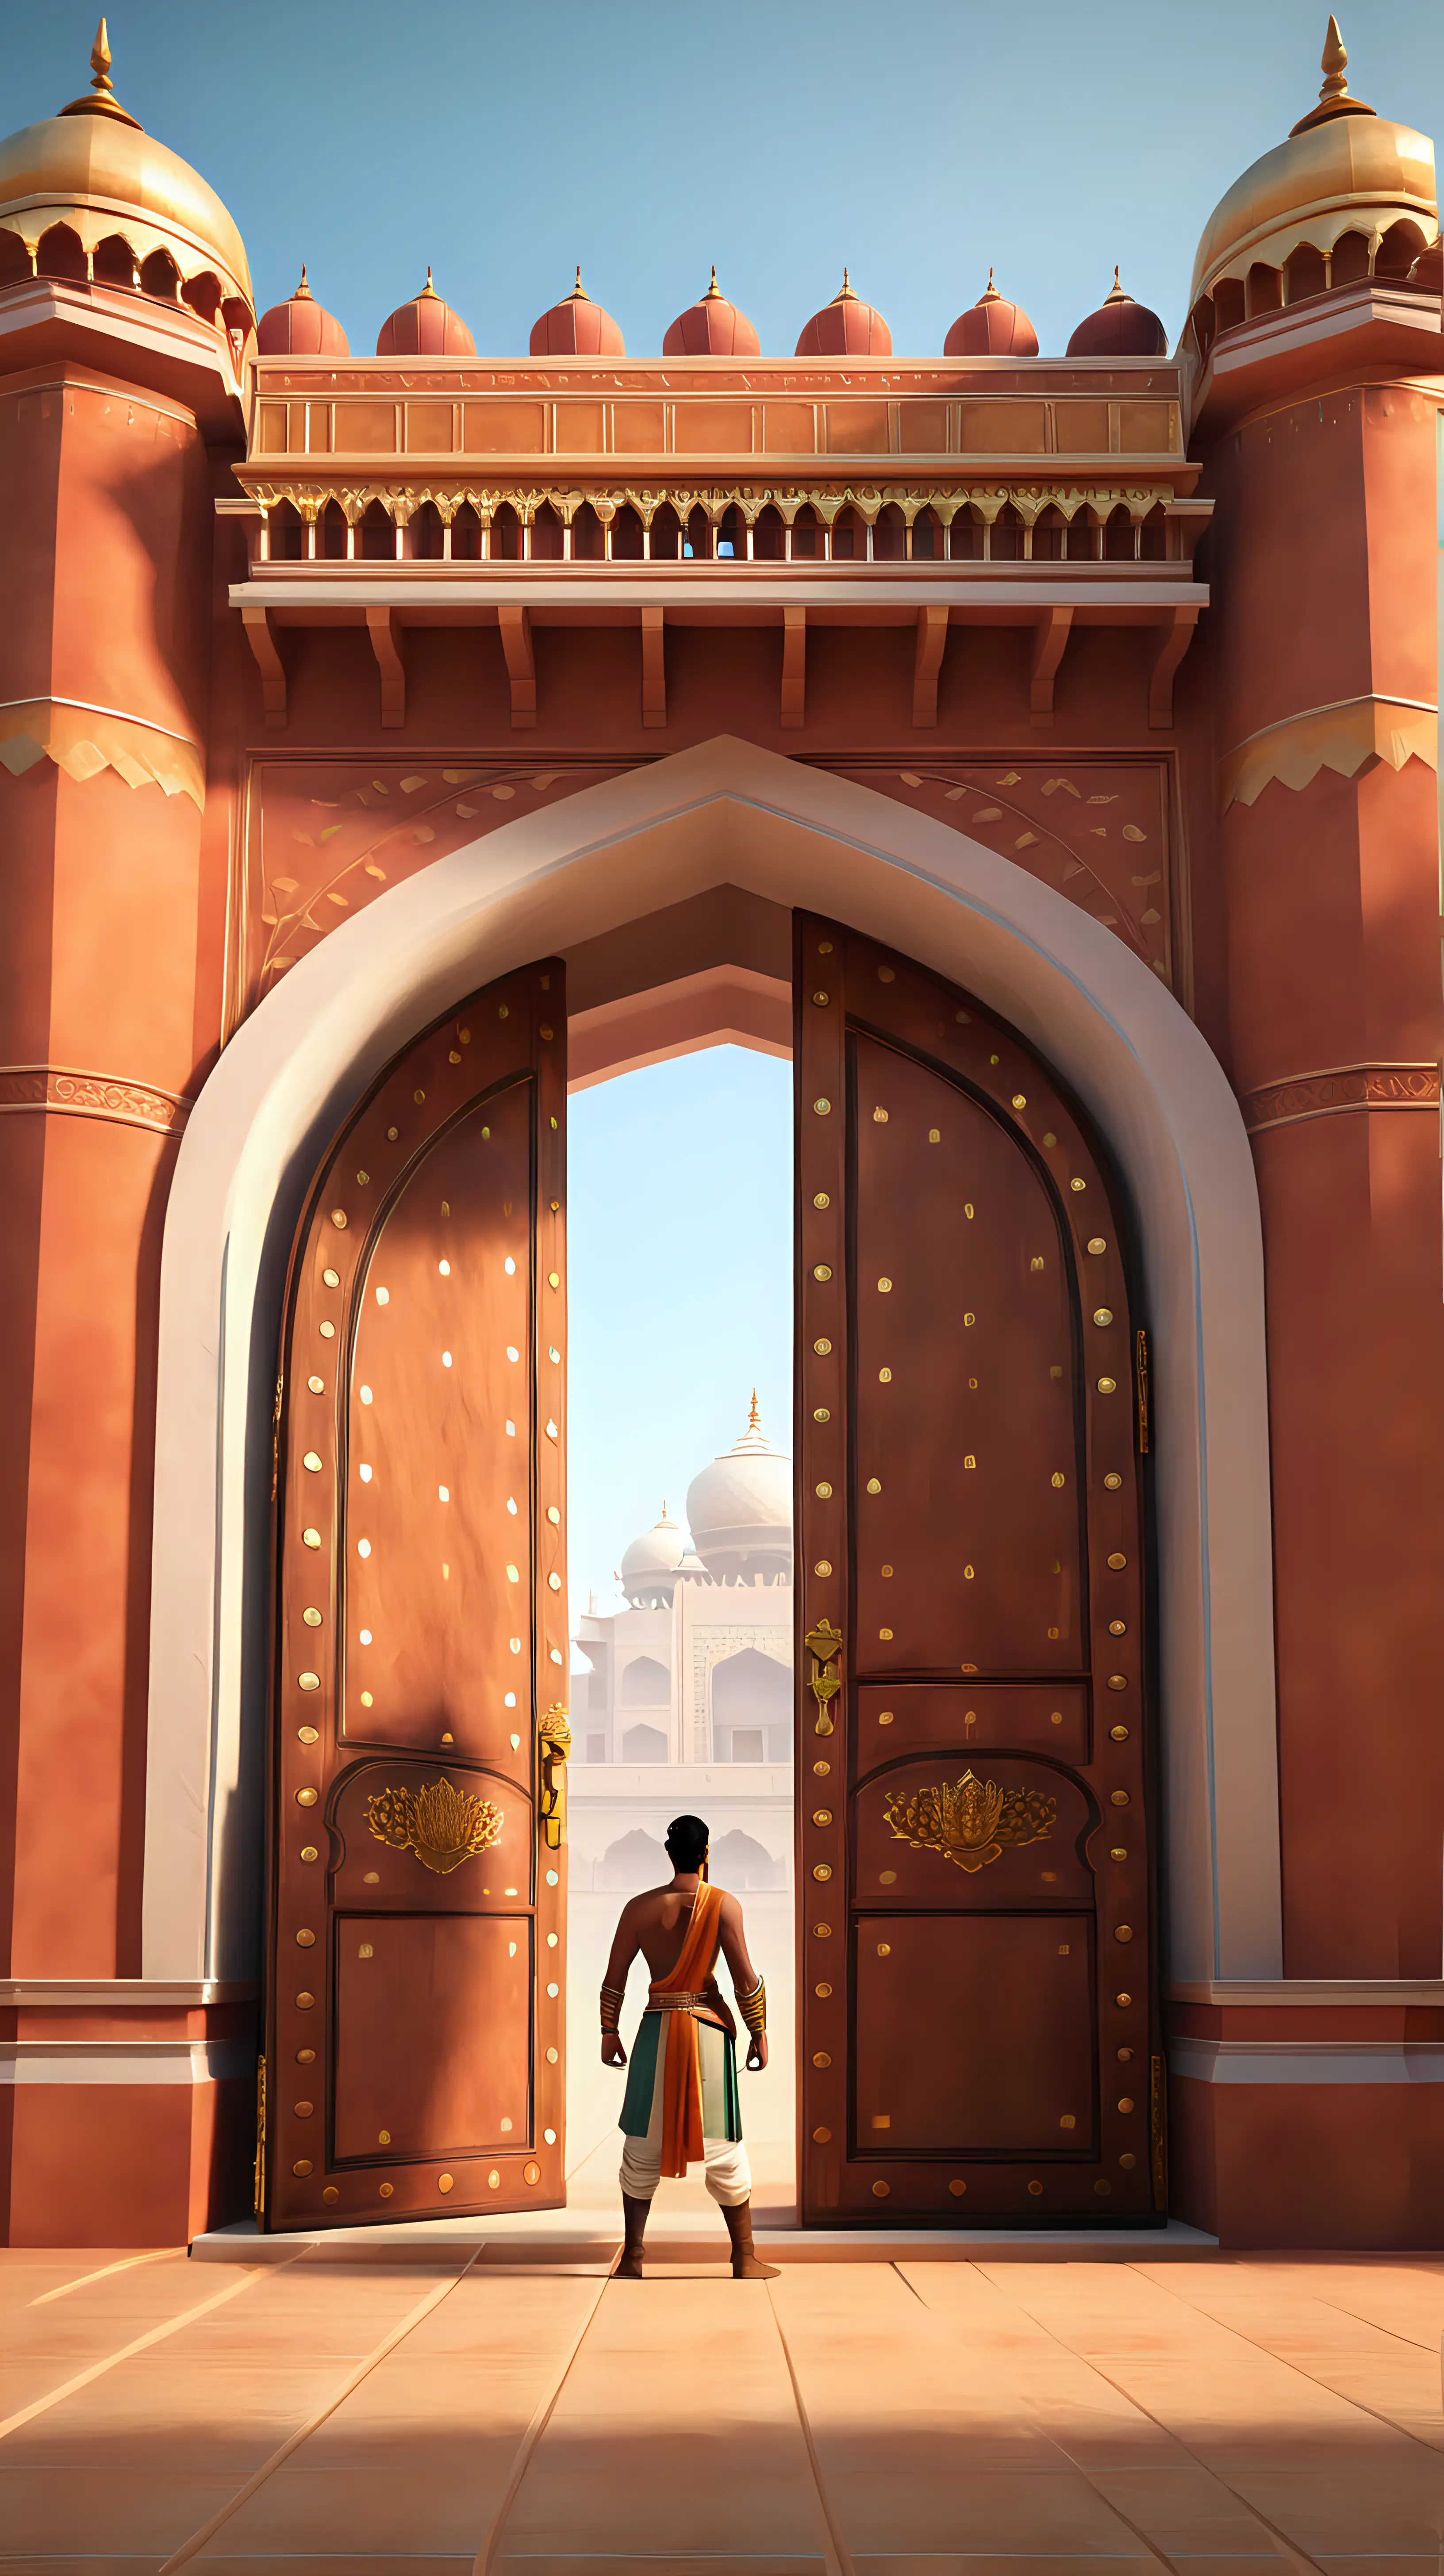 Create a 3D illustrator of an animated back view image shows a 18th century young man, with Indian skintoned, standing confidently in front of a grand, opened entrance to a kingdom. His hand is outstretched, symbolizing strength and determination as he opens the massive doors effortlessly. The scene conveys a sense of power, courage, and possibility, suggesting the individual's ability to conquer challenges and enter new realms with ease.Beautiful colourful and spirited background illustrations.